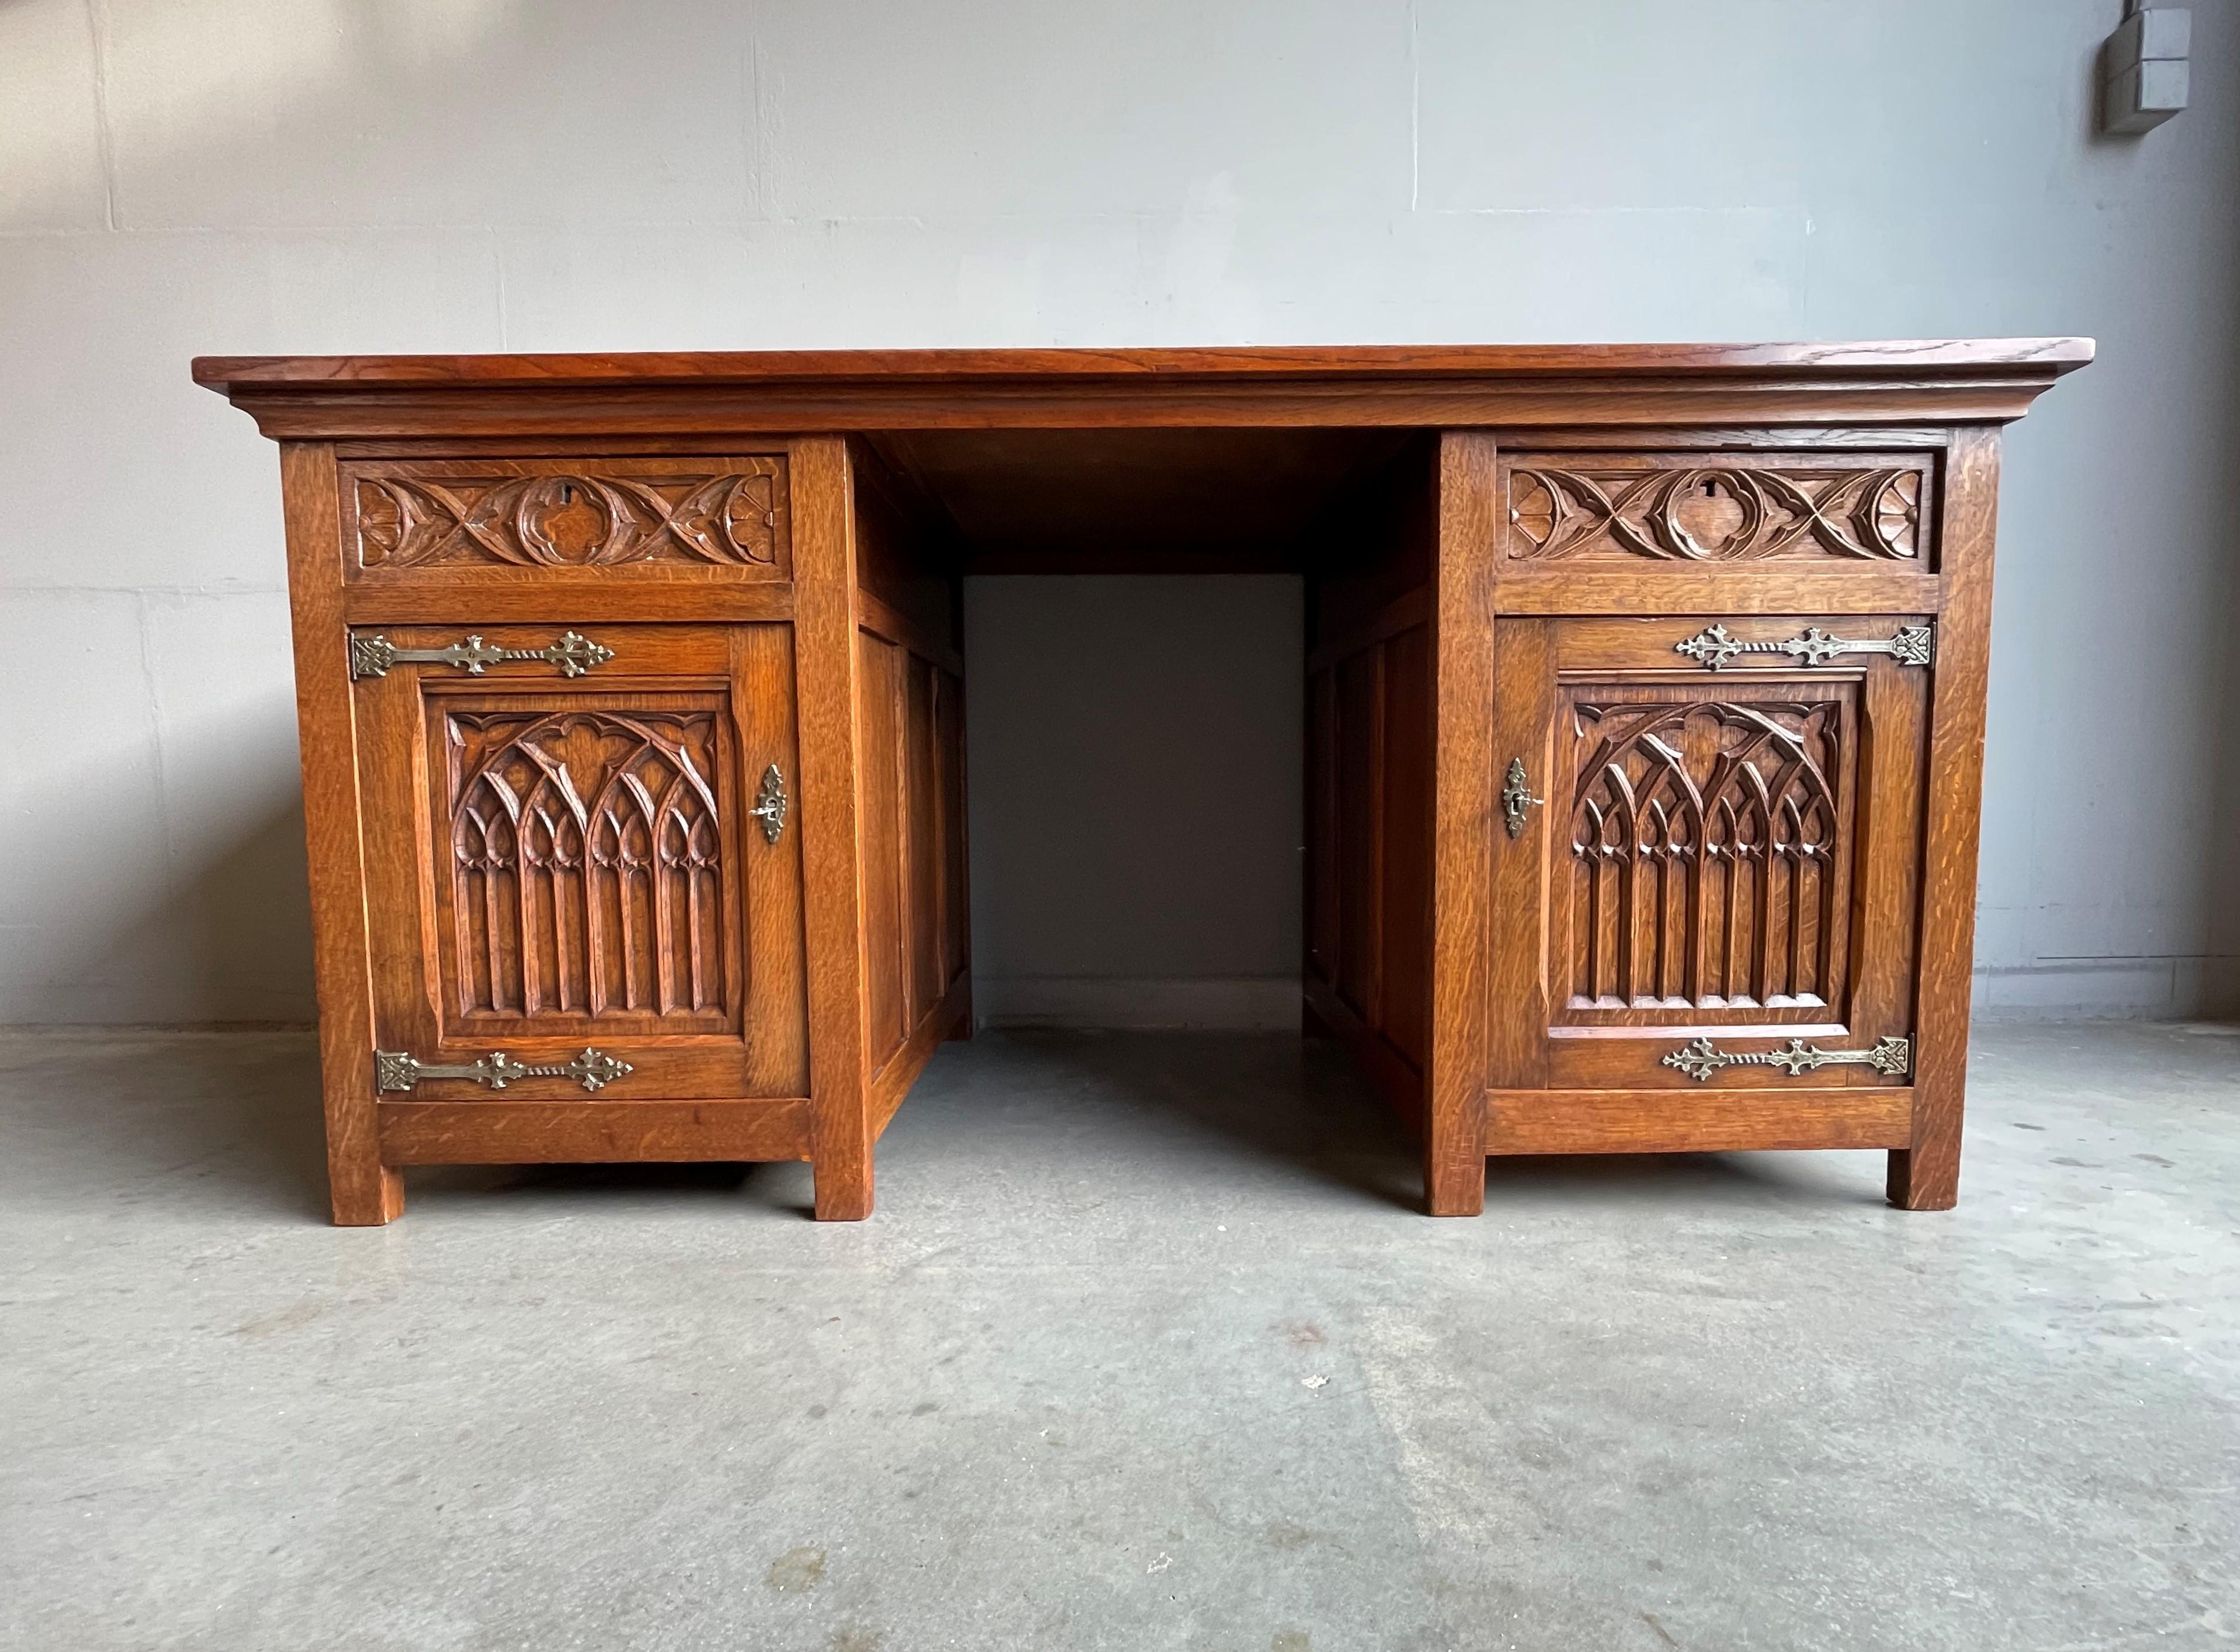 Wonderful Gothic Revival desk with an amazing presence and patina.

If you like Gothic Revival furniture then we are certain you will like this quality carved Gothic desk. This good size and highly practical specimen comes with very attractive,